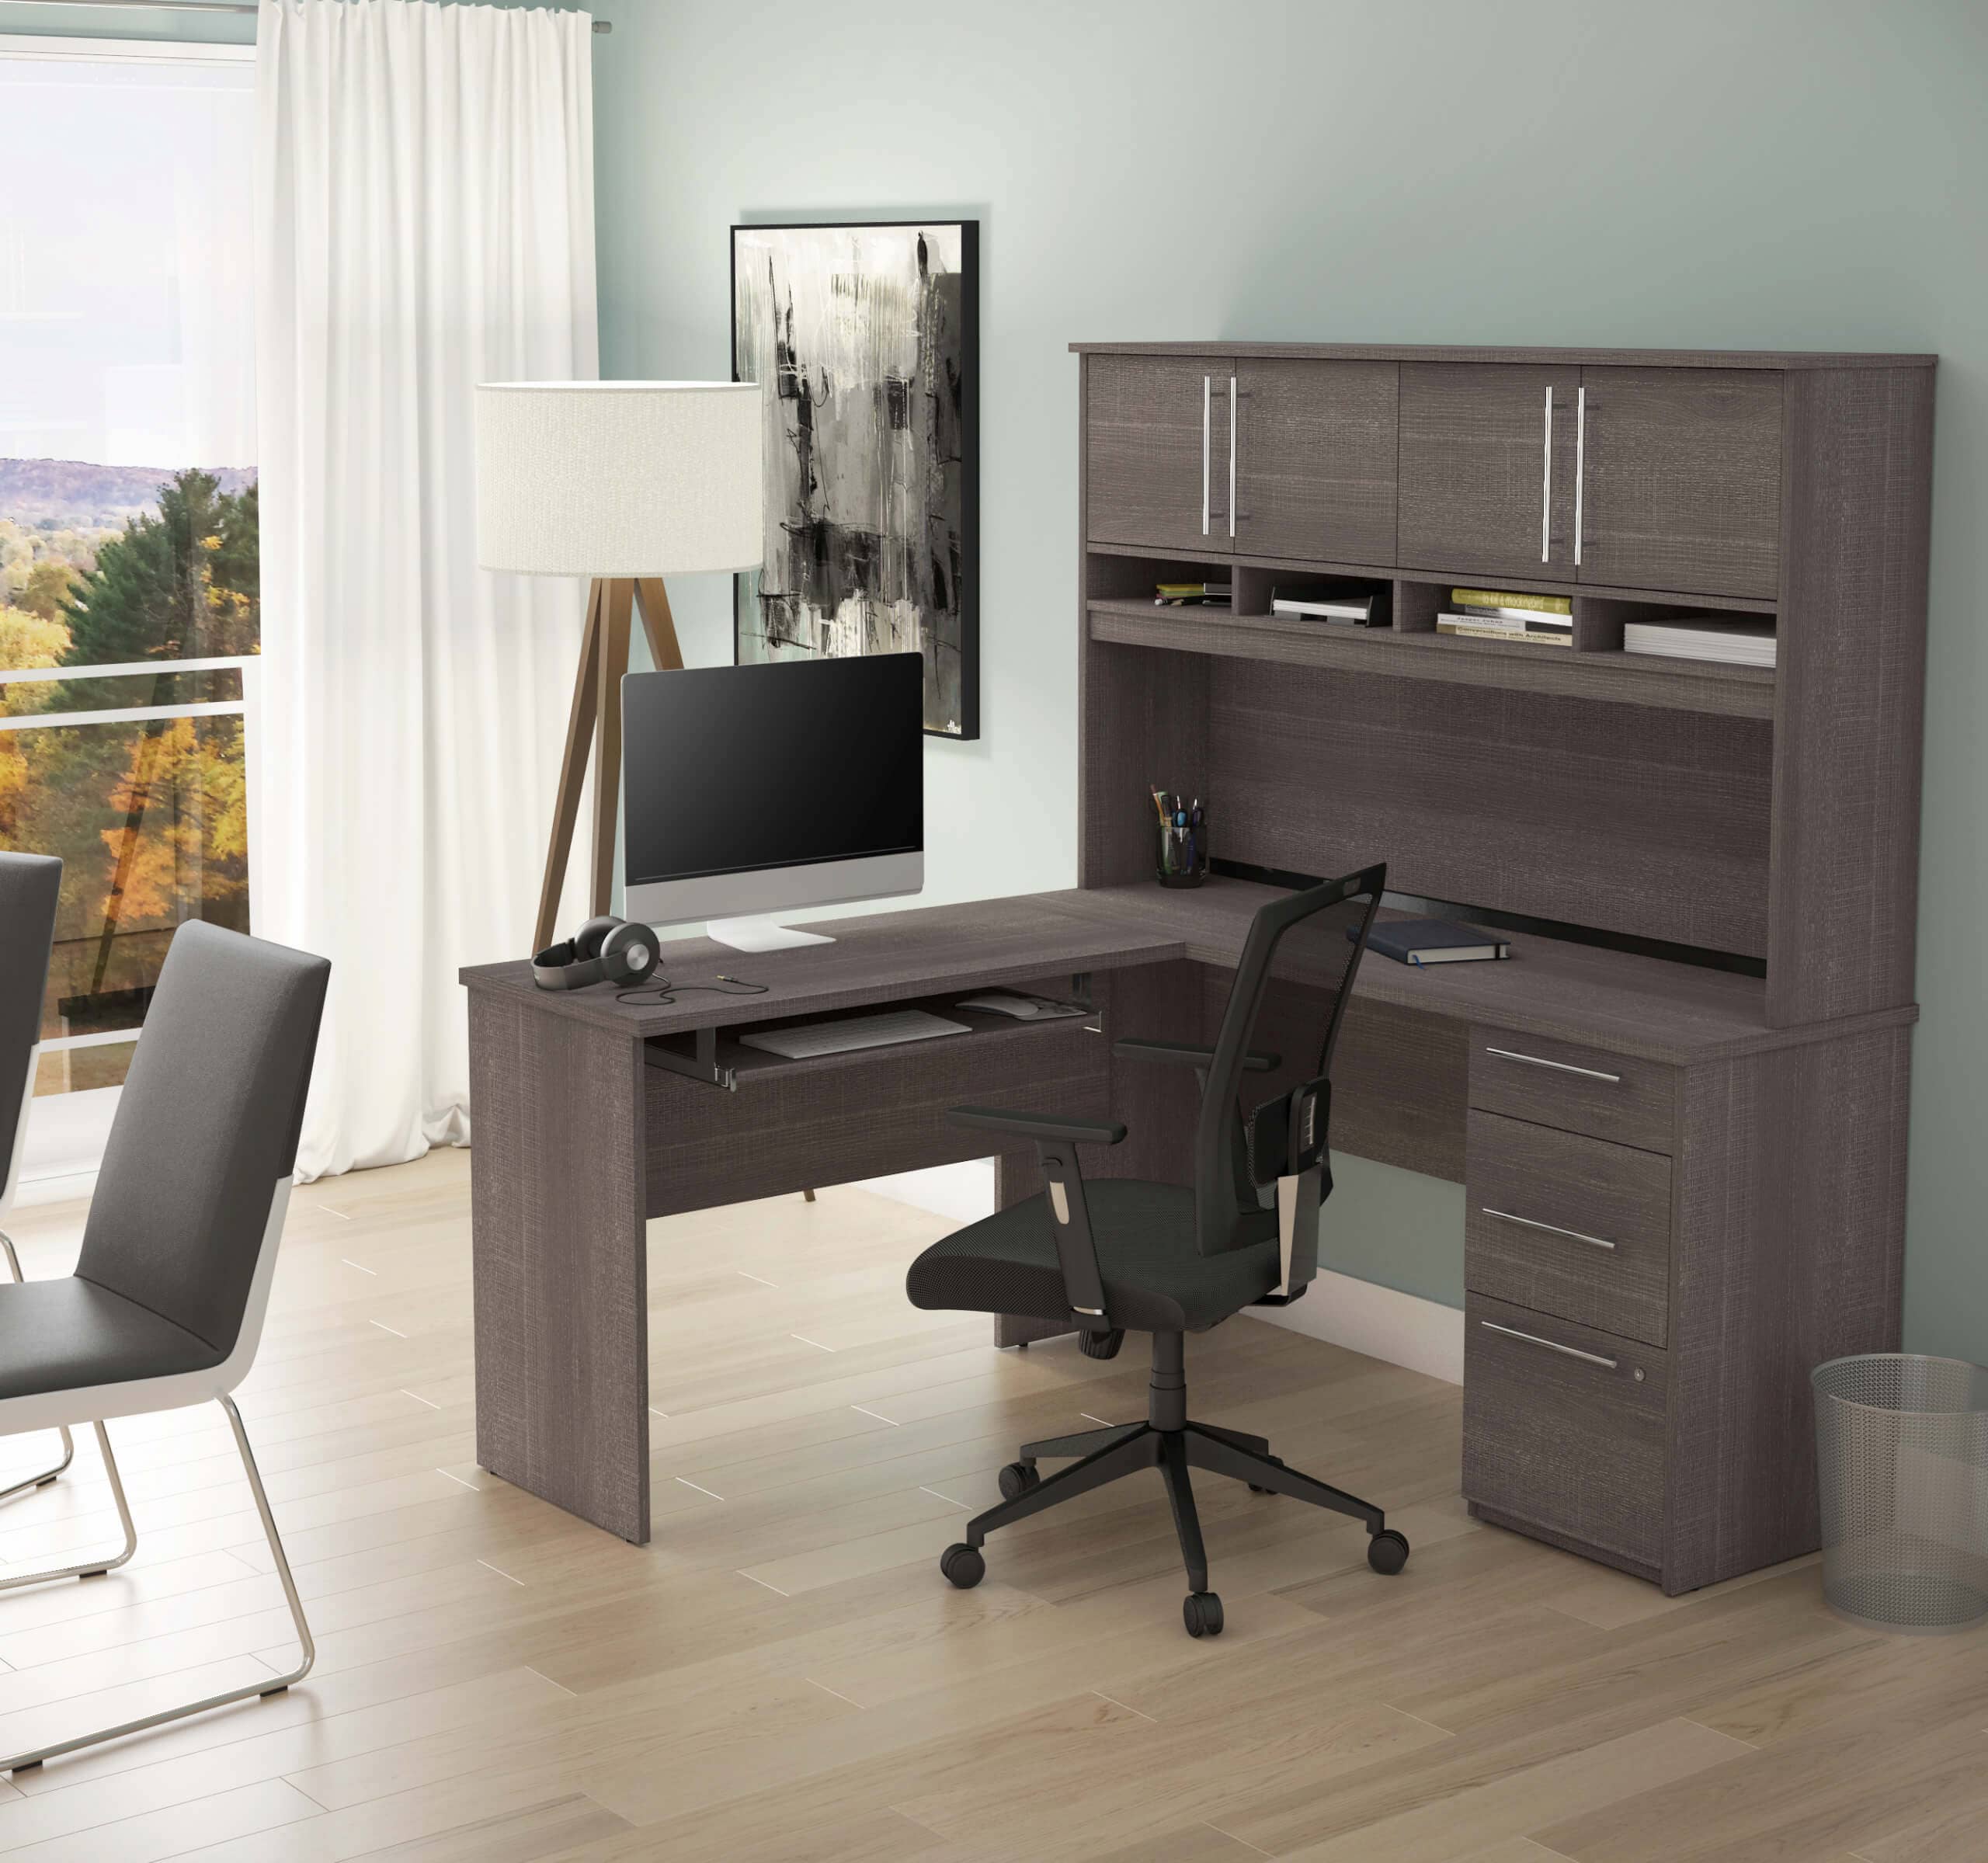 Home office with a Bestar L shaped desk with hutch